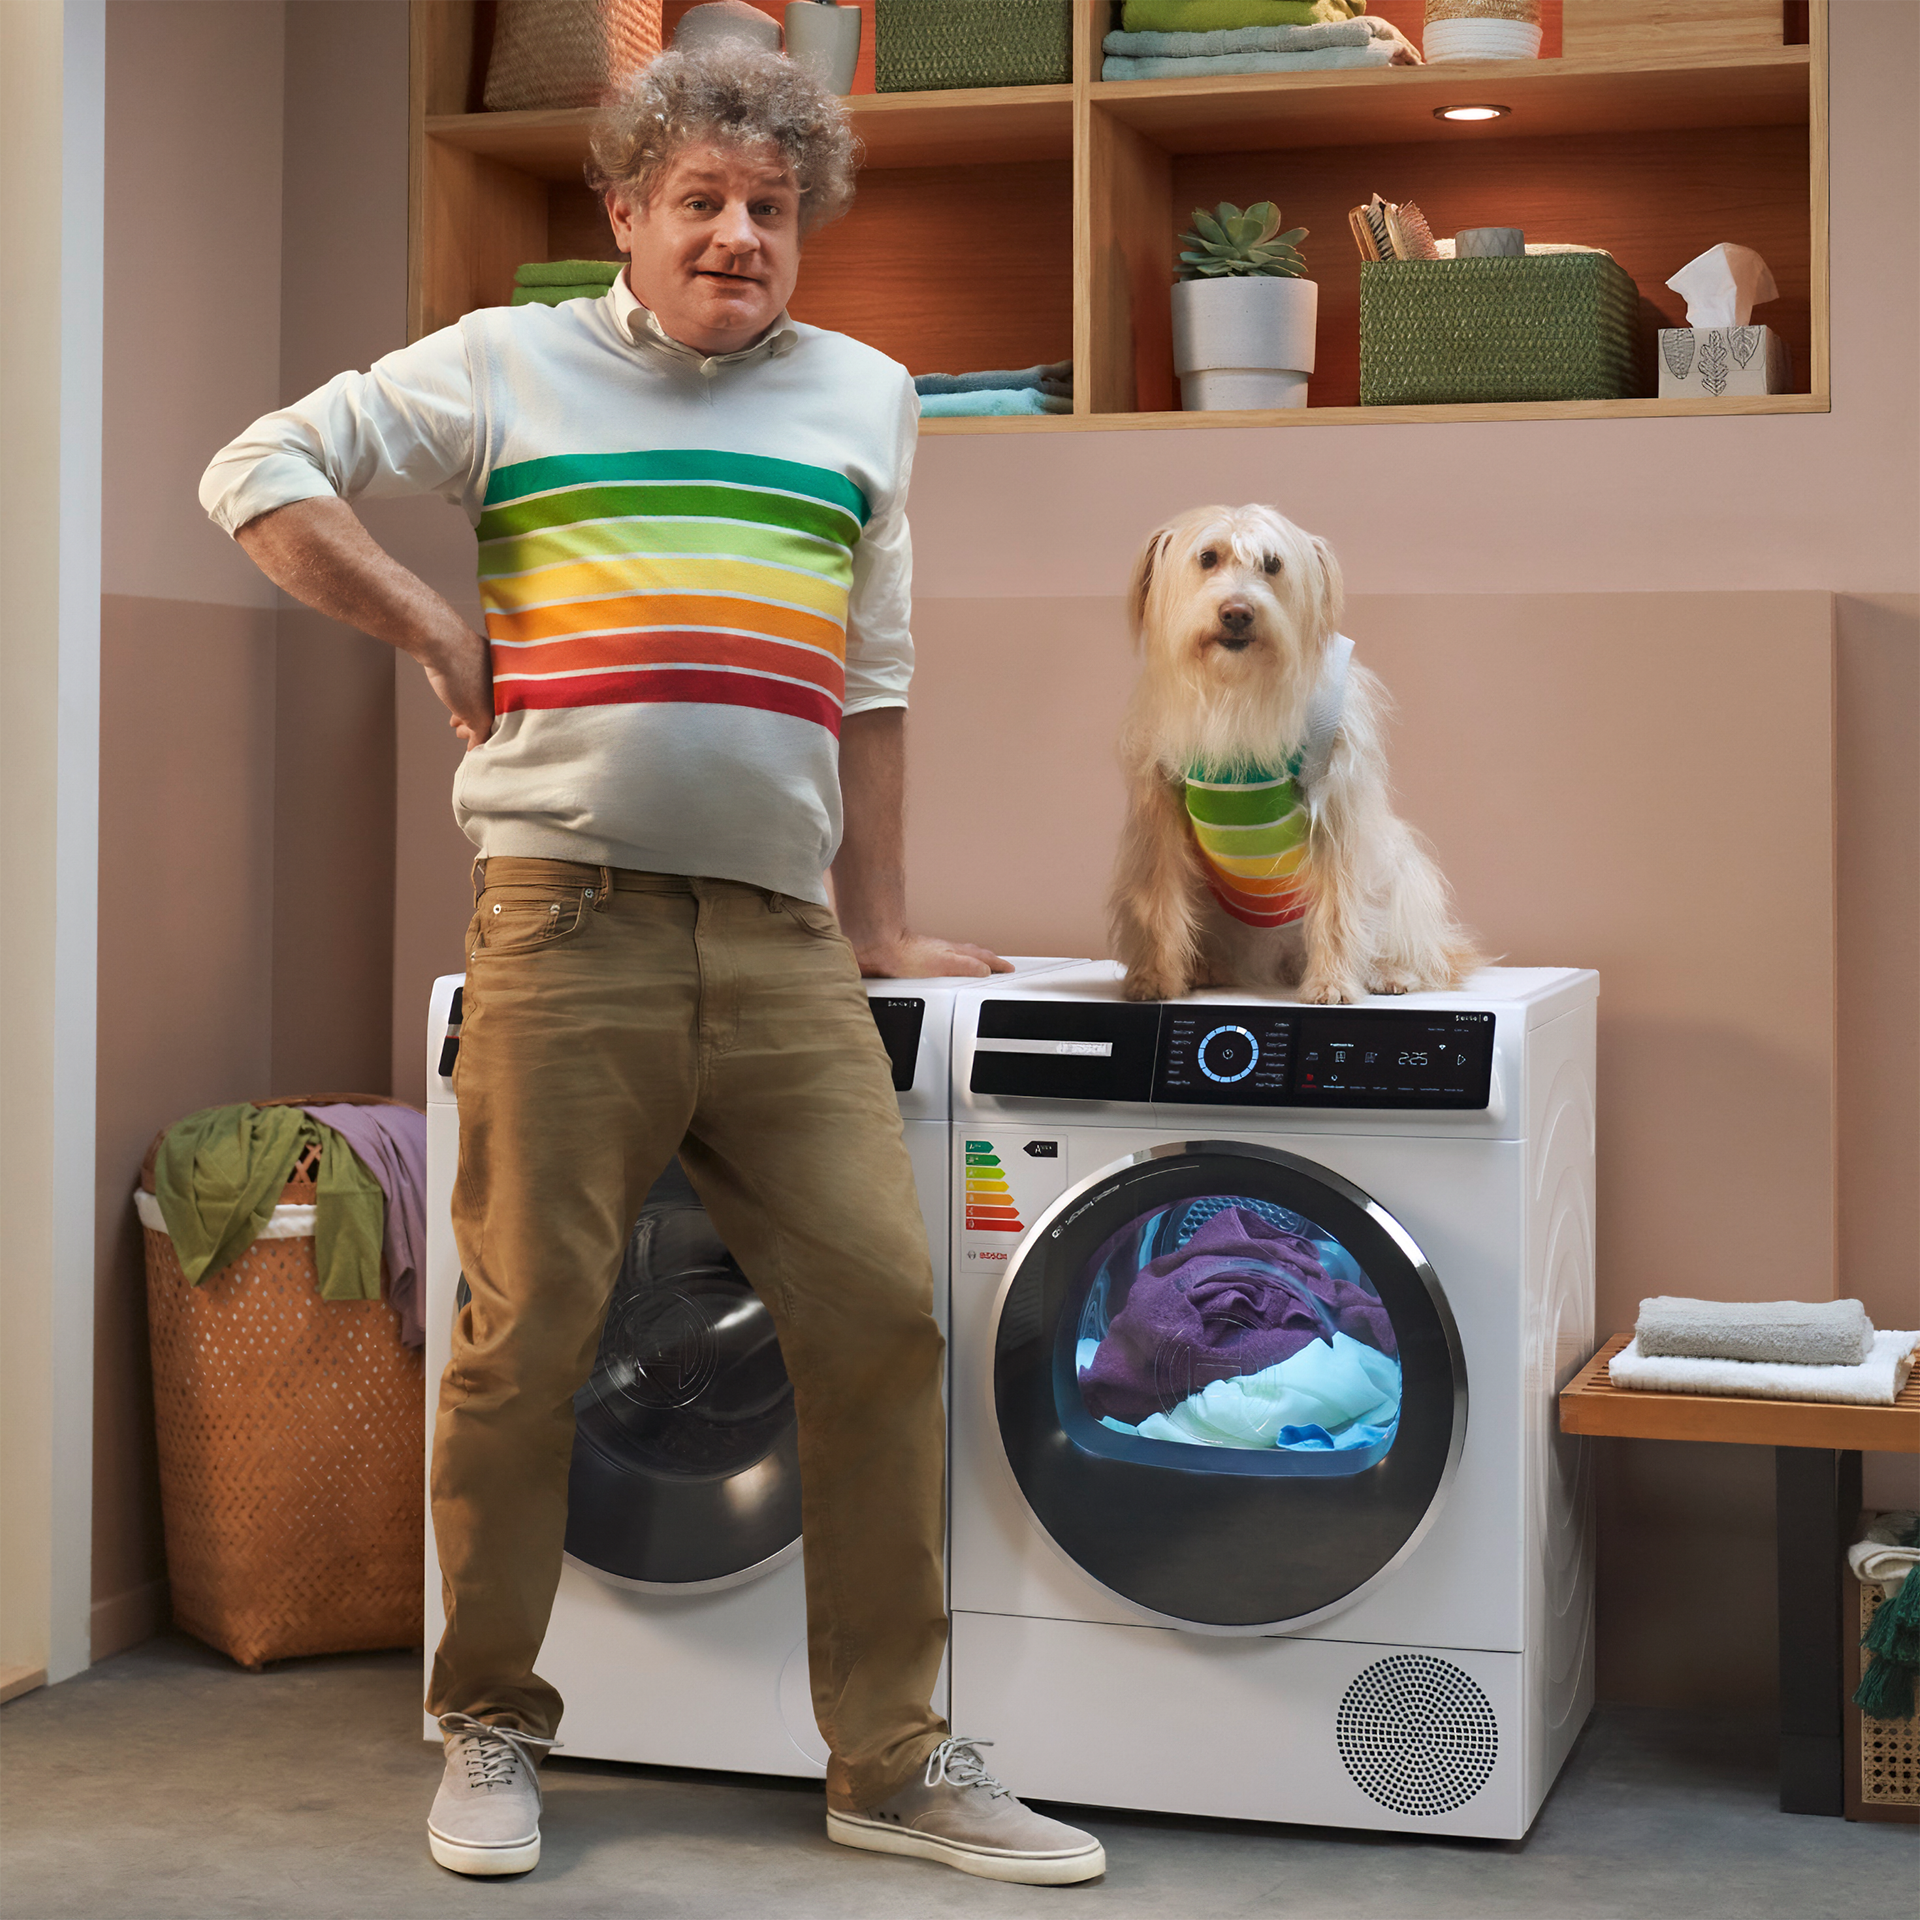 Image of a man with gray curls and a shaggy dog sitting on a washing machine for the "Like A Bosch" campaign. Both are wearing a top depicting the colors of the energy efficiency scale